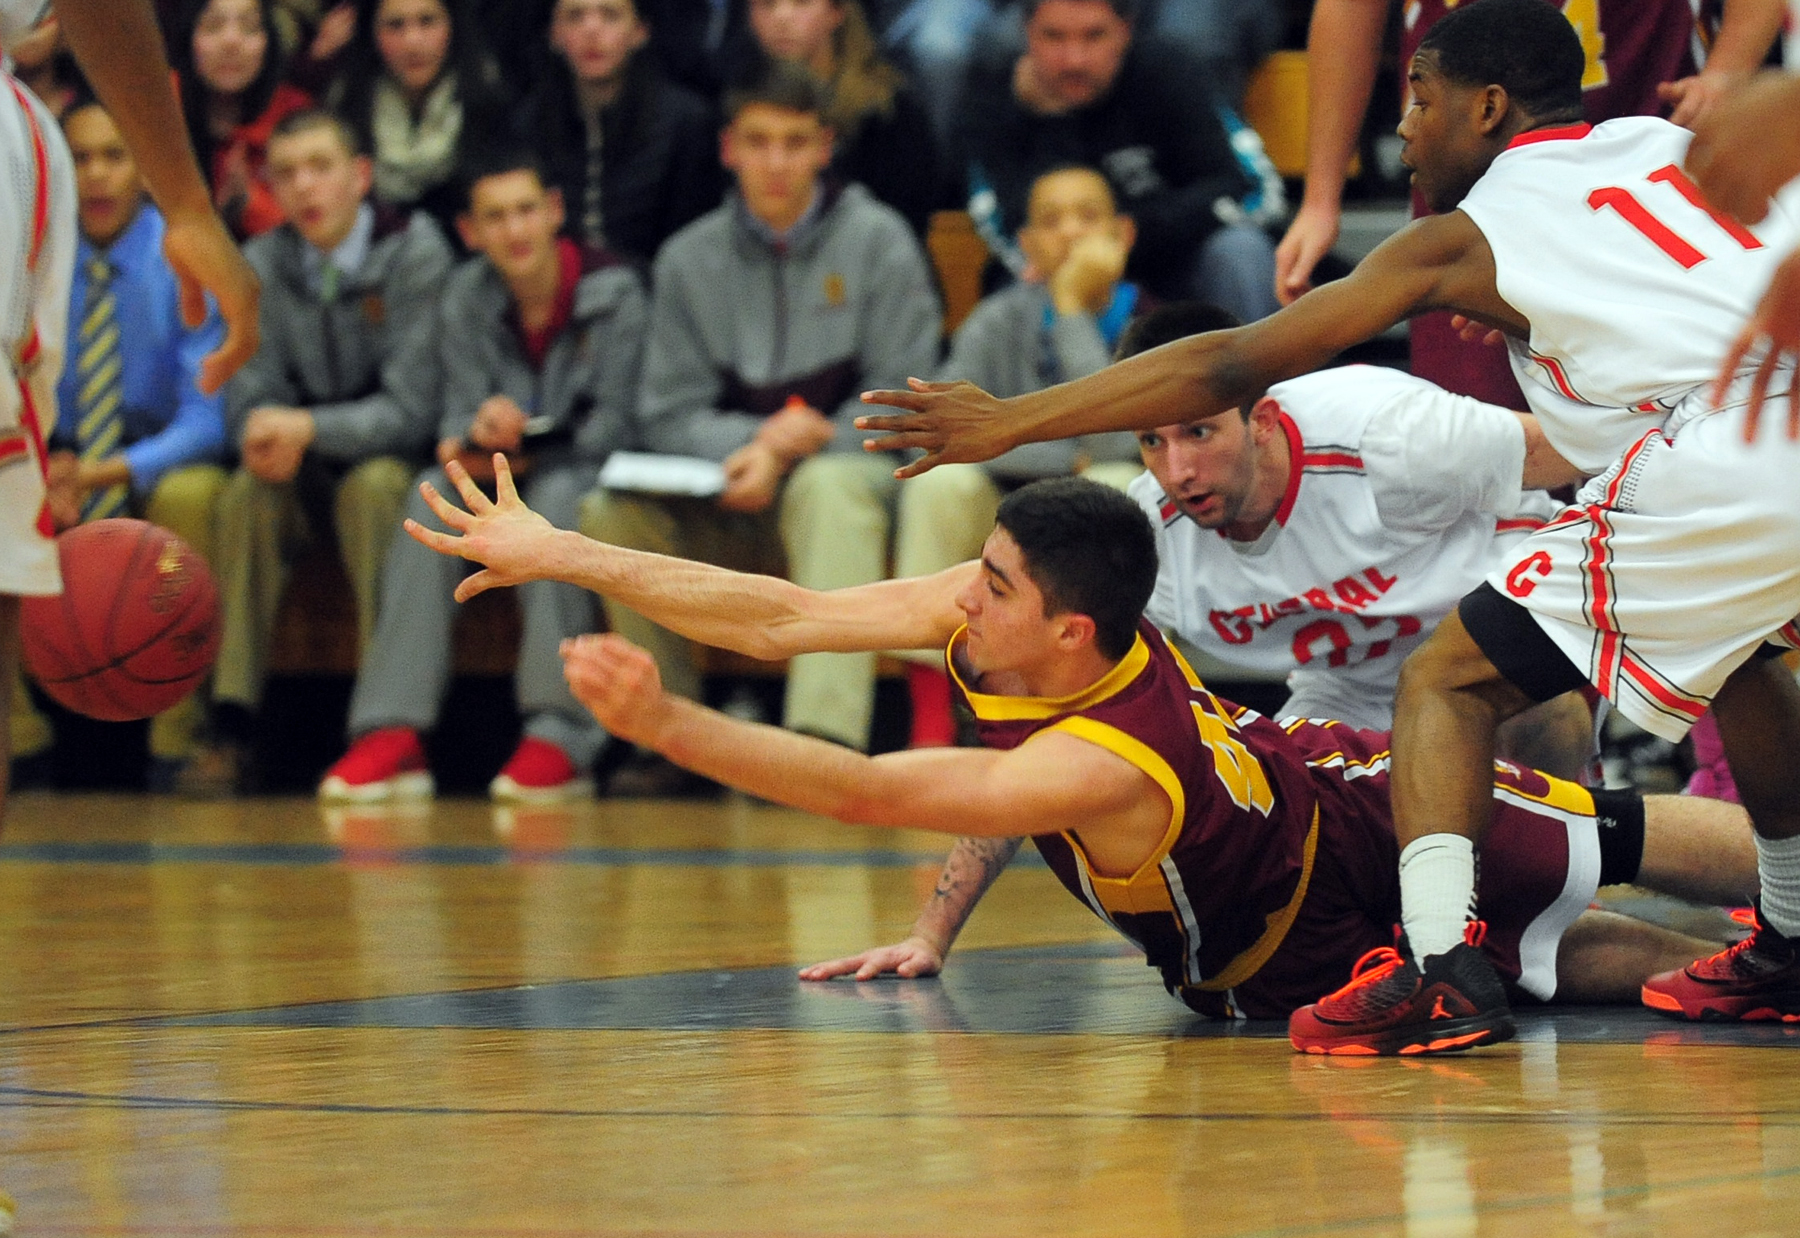 High school hustle: Getting the loose ball - Connecticut Post1800 x 1238